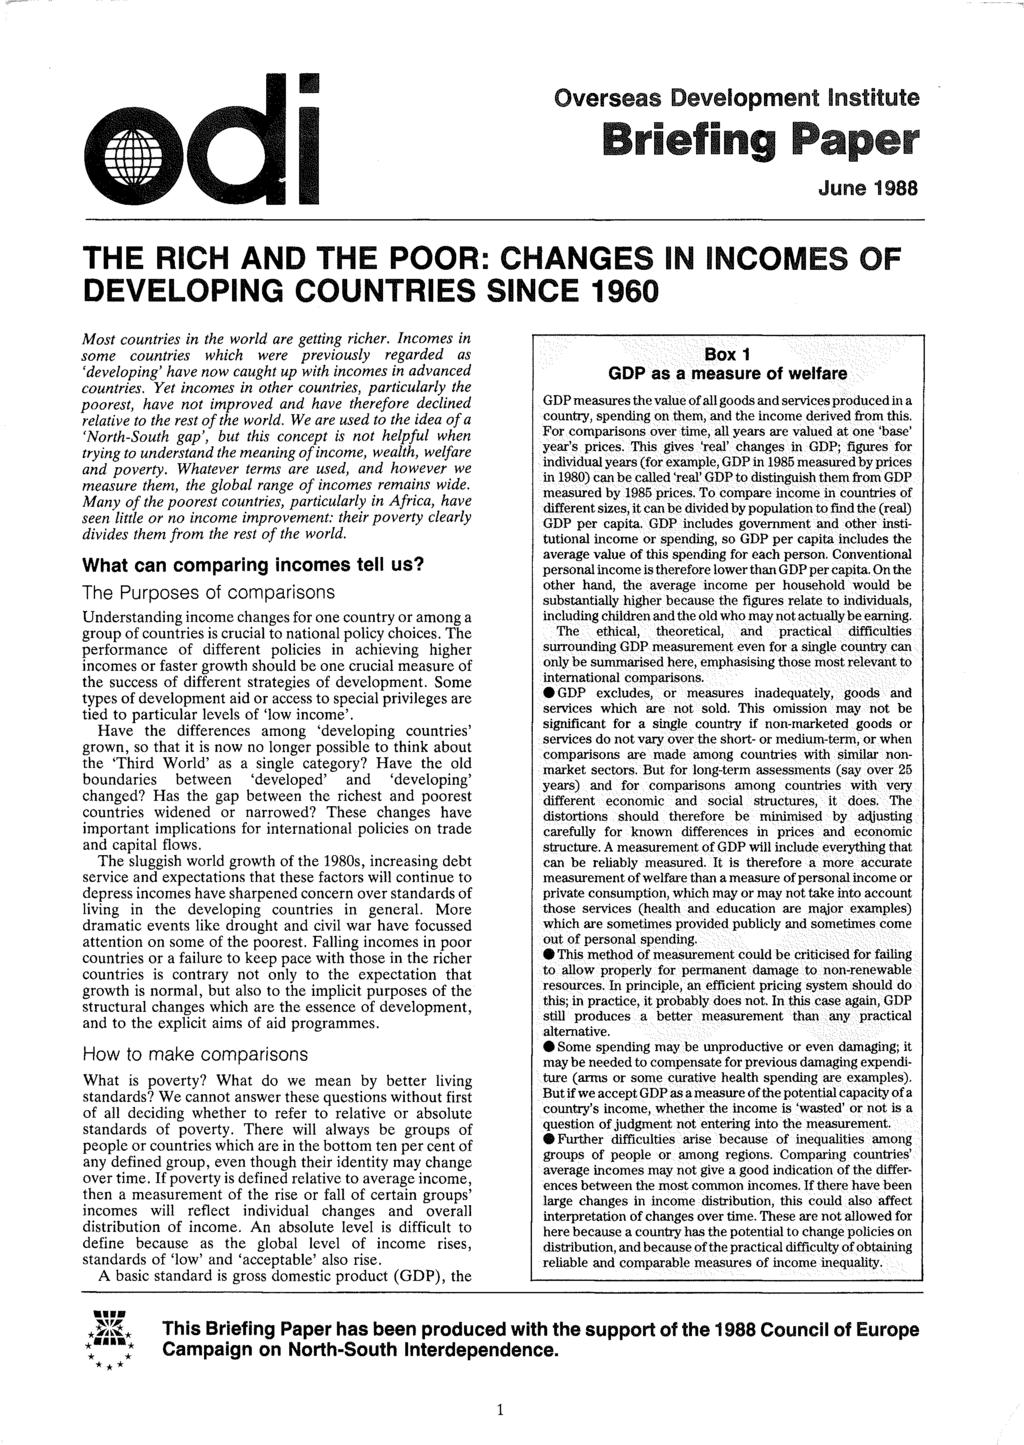 Overseas Development Institute Briefing Paper June 1988 THE RICH AND THE POOR: CHANGES IN INCOMES OF DEVELOPING COUNTRIES SINCE 1960 Most countries in the world are getting richer.